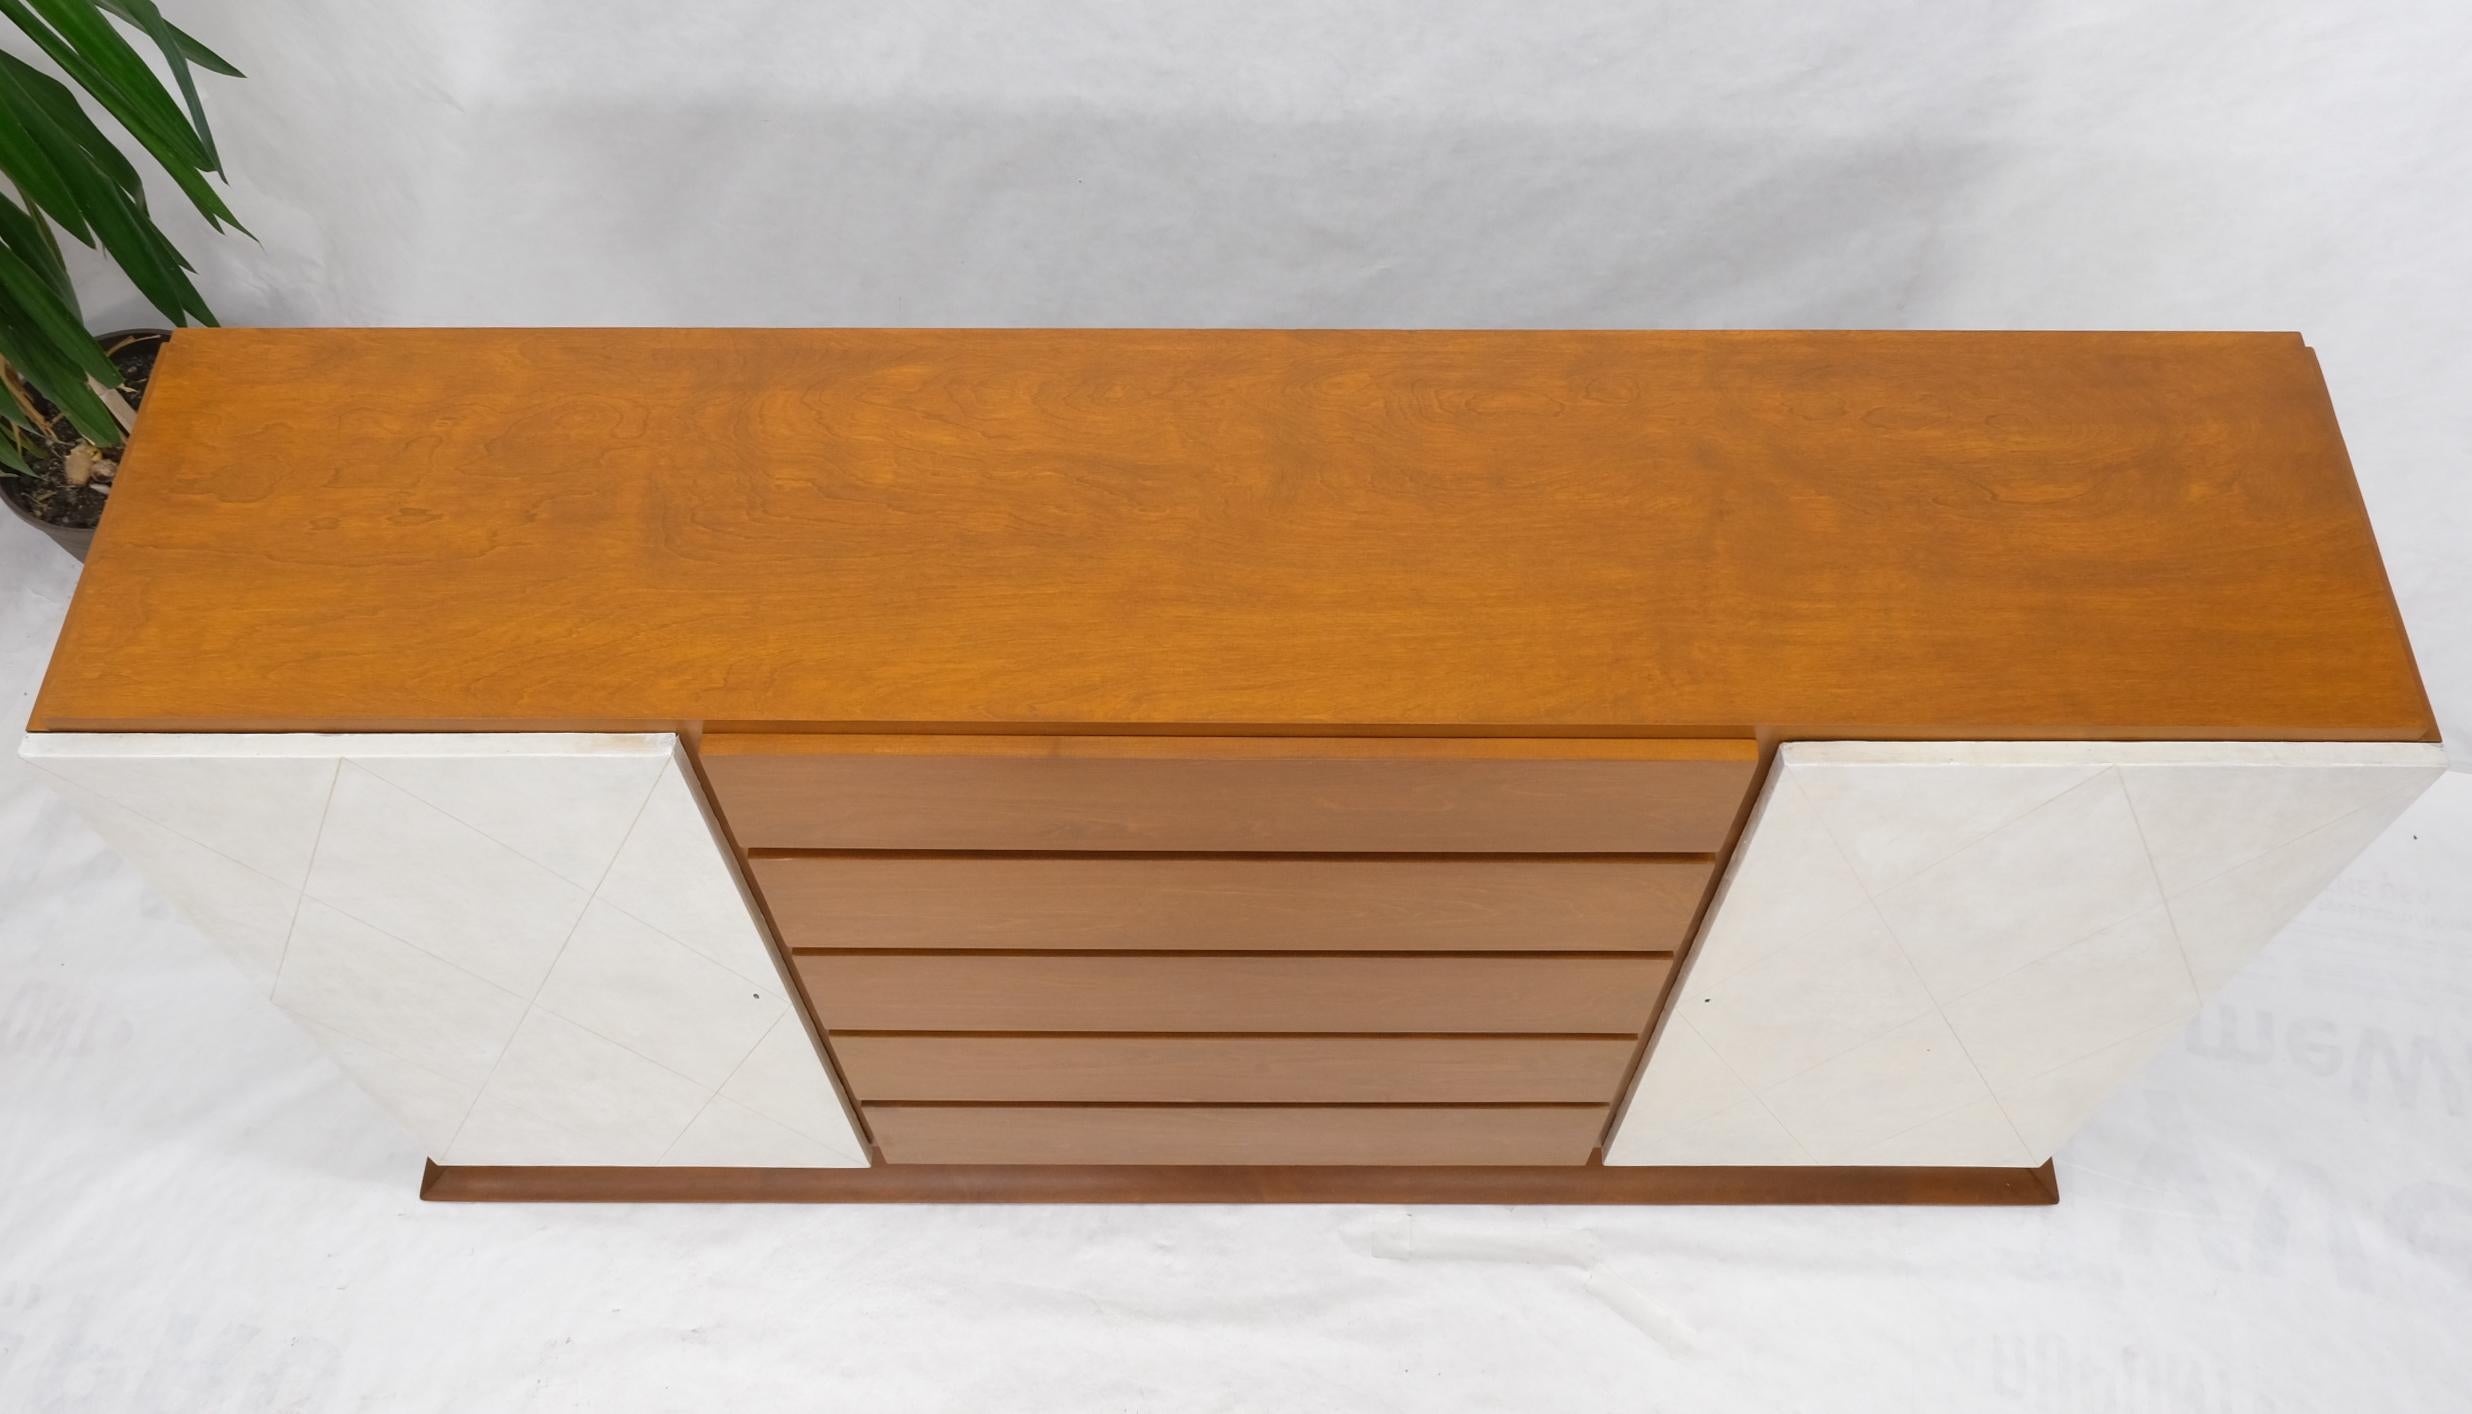 20th Century Art Deco 5 Drawers w/ 2 Secret Drawers 2 Leather Diamond Doors Compartment For Sale